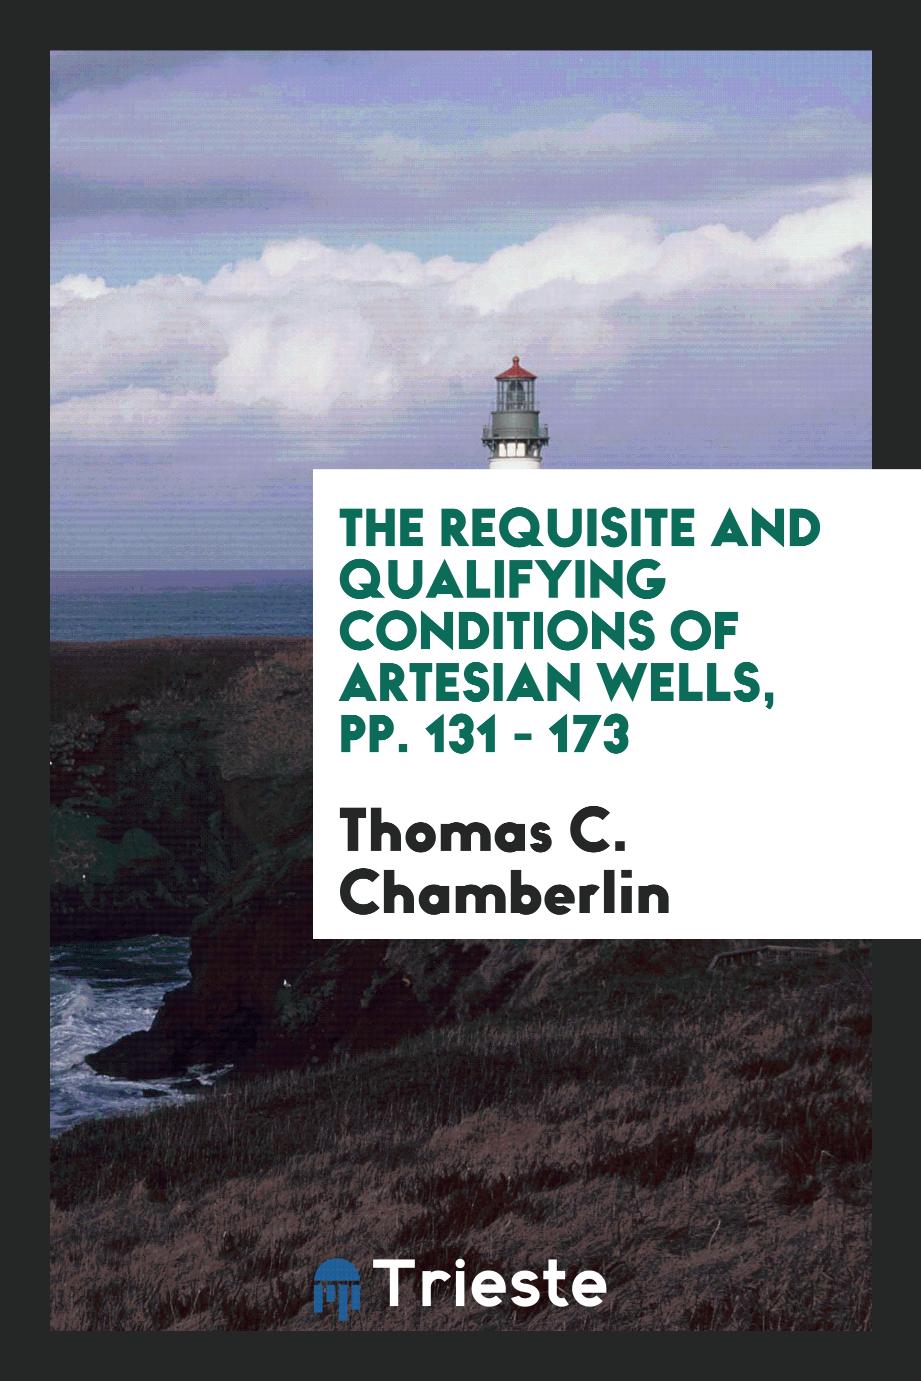 The Requisite and Qualifying Conditions of Artesian Wells, pp. 131 - 173